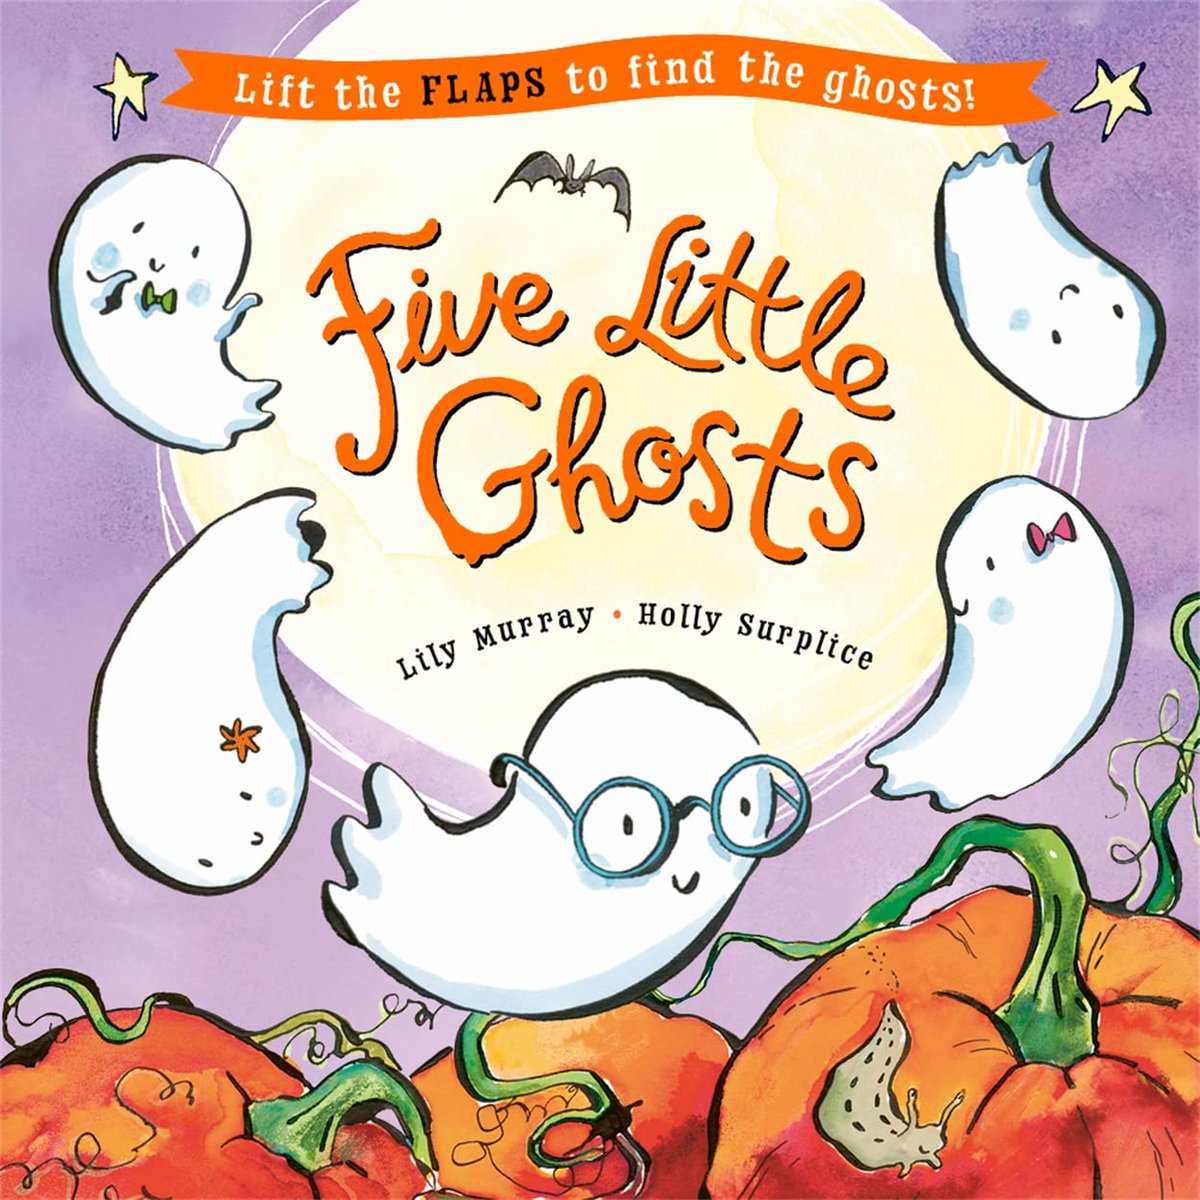 Little ghostlings are causing a flap just in time for #Halloween in @lilymurraybooks & @HollySurplice’s enchanting lift-the-flap picture book #FiveLittleGhosts @templarbooks @amberivatt lep.co.uk/arts-and-cultu…